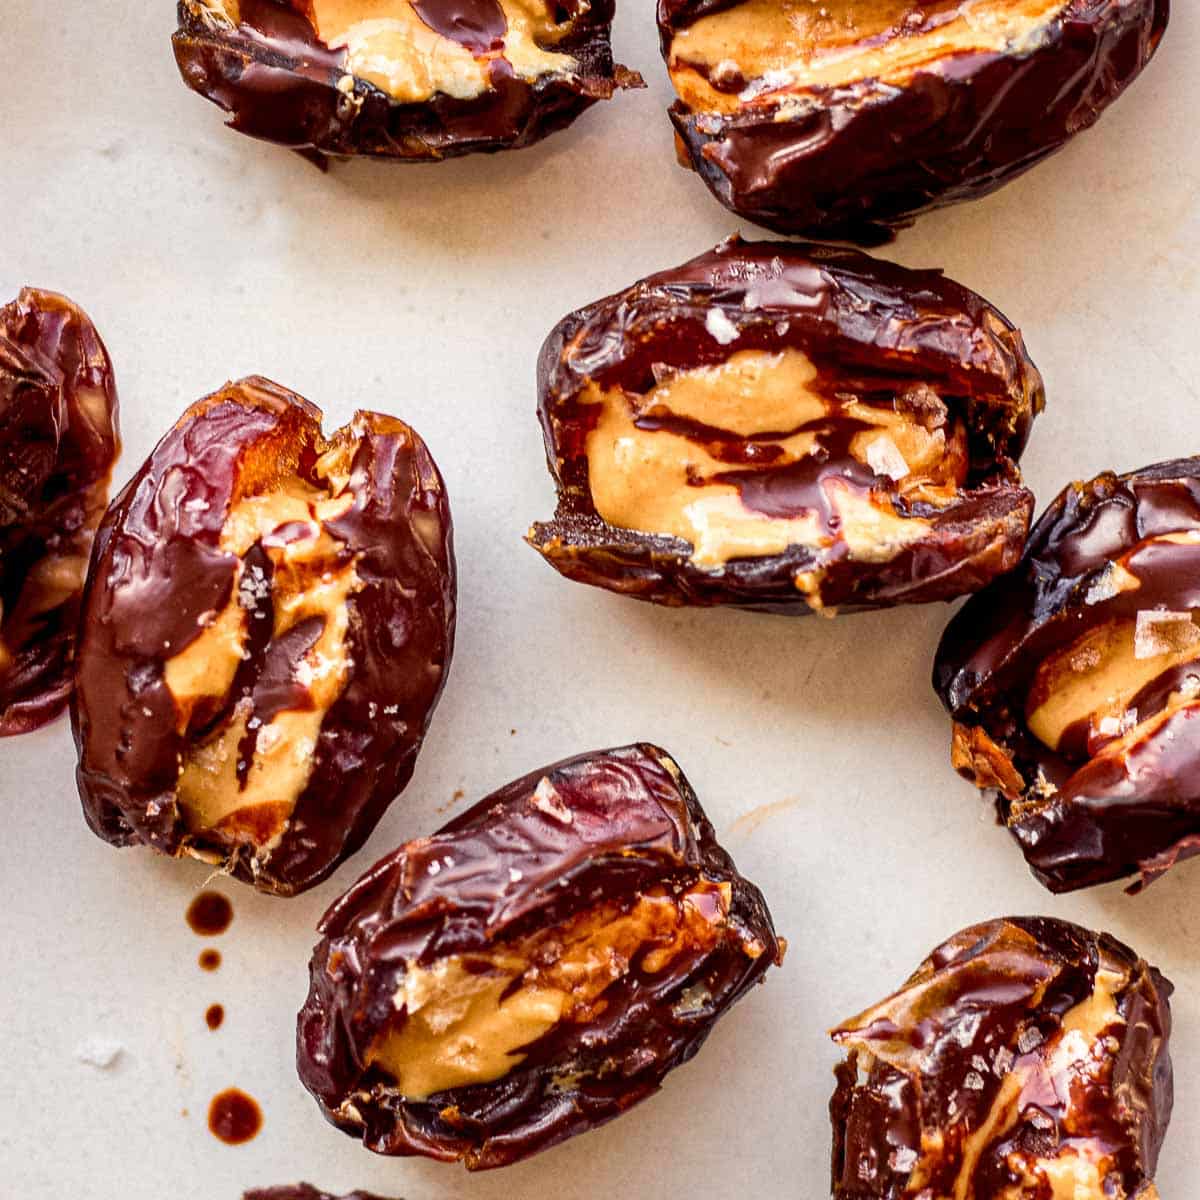 https://vancouverwithlove.com/wp-content/uploads/2023/03/stuffed-dates-with-peanut-butter-chocolate-featured1.jpg